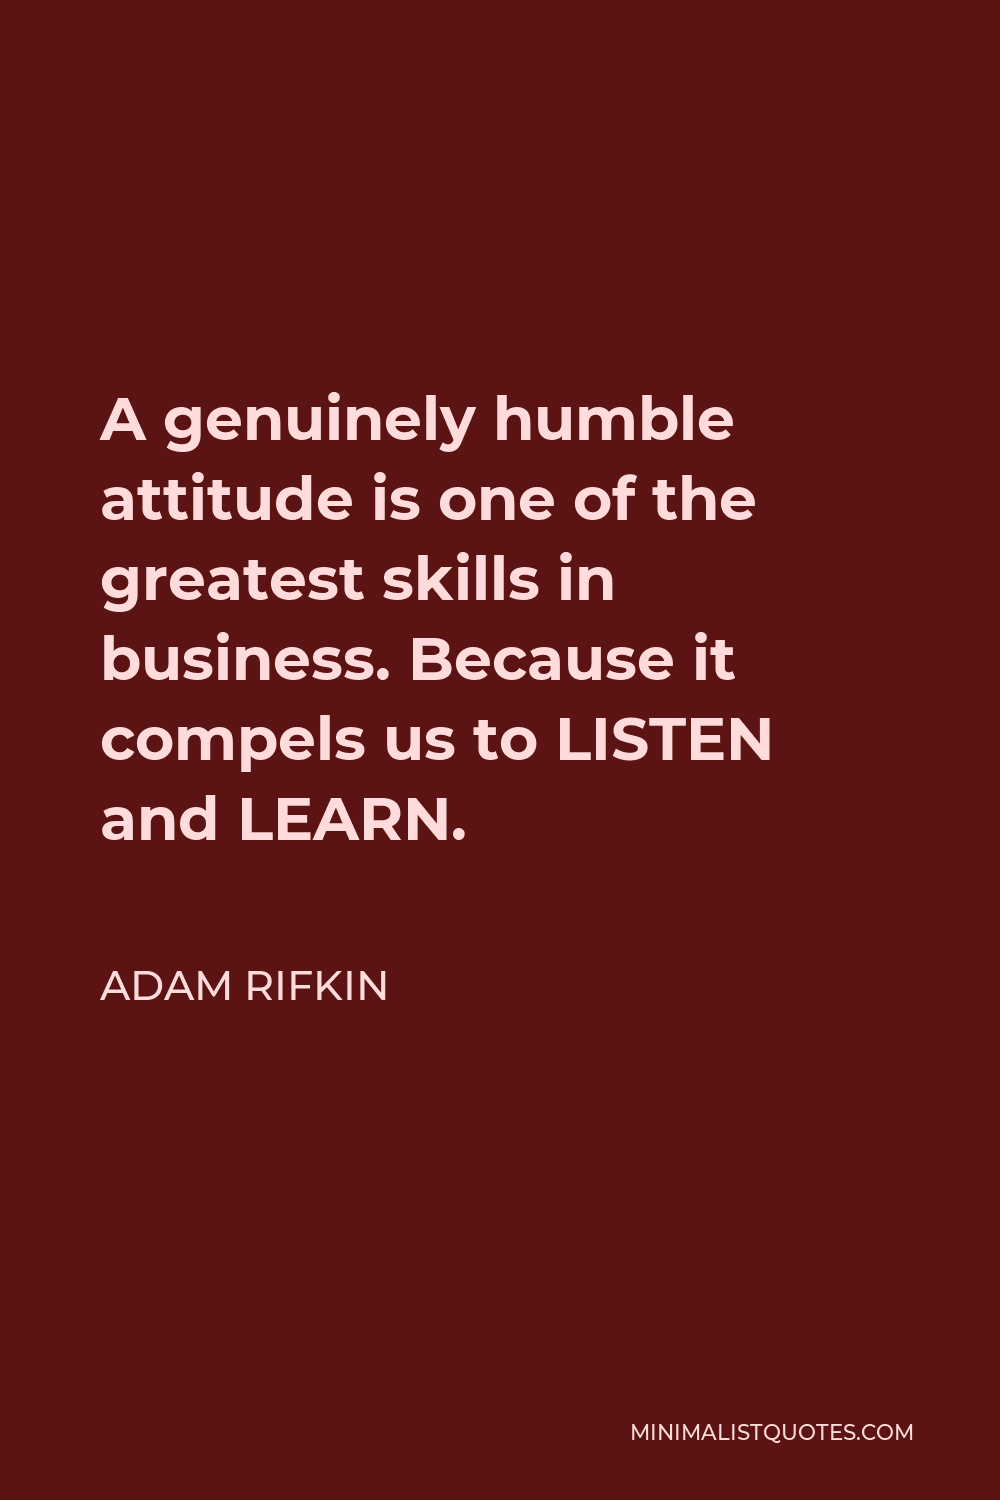 Adam Rifkin Quote - A genuinely humble attitude is one of the greatest skills in business. Because it compels us to LISTEN and LEARN.